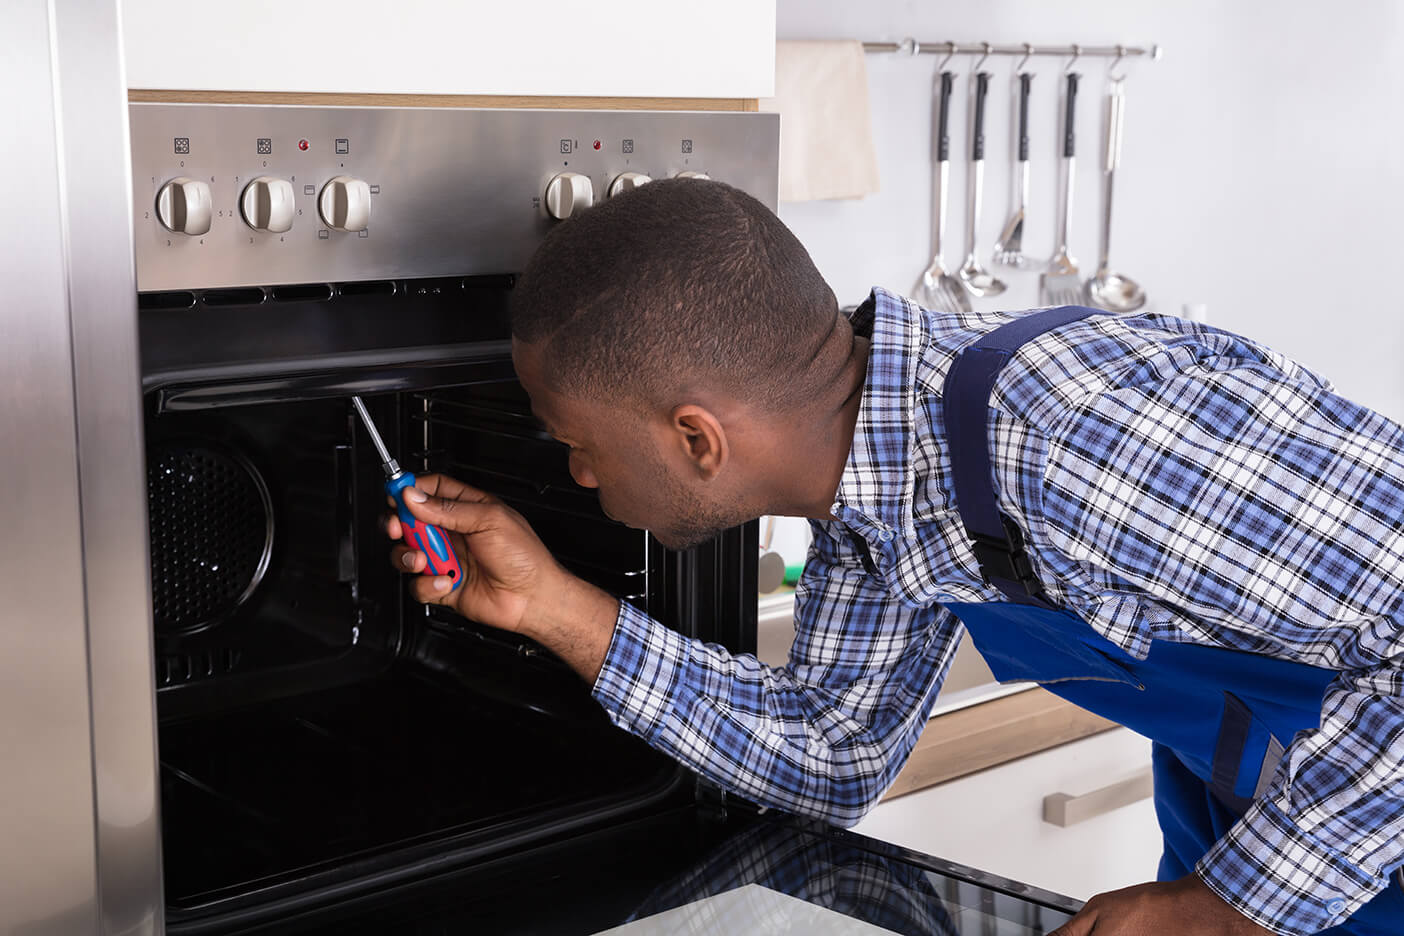 Man fixing stove with a screwdriver